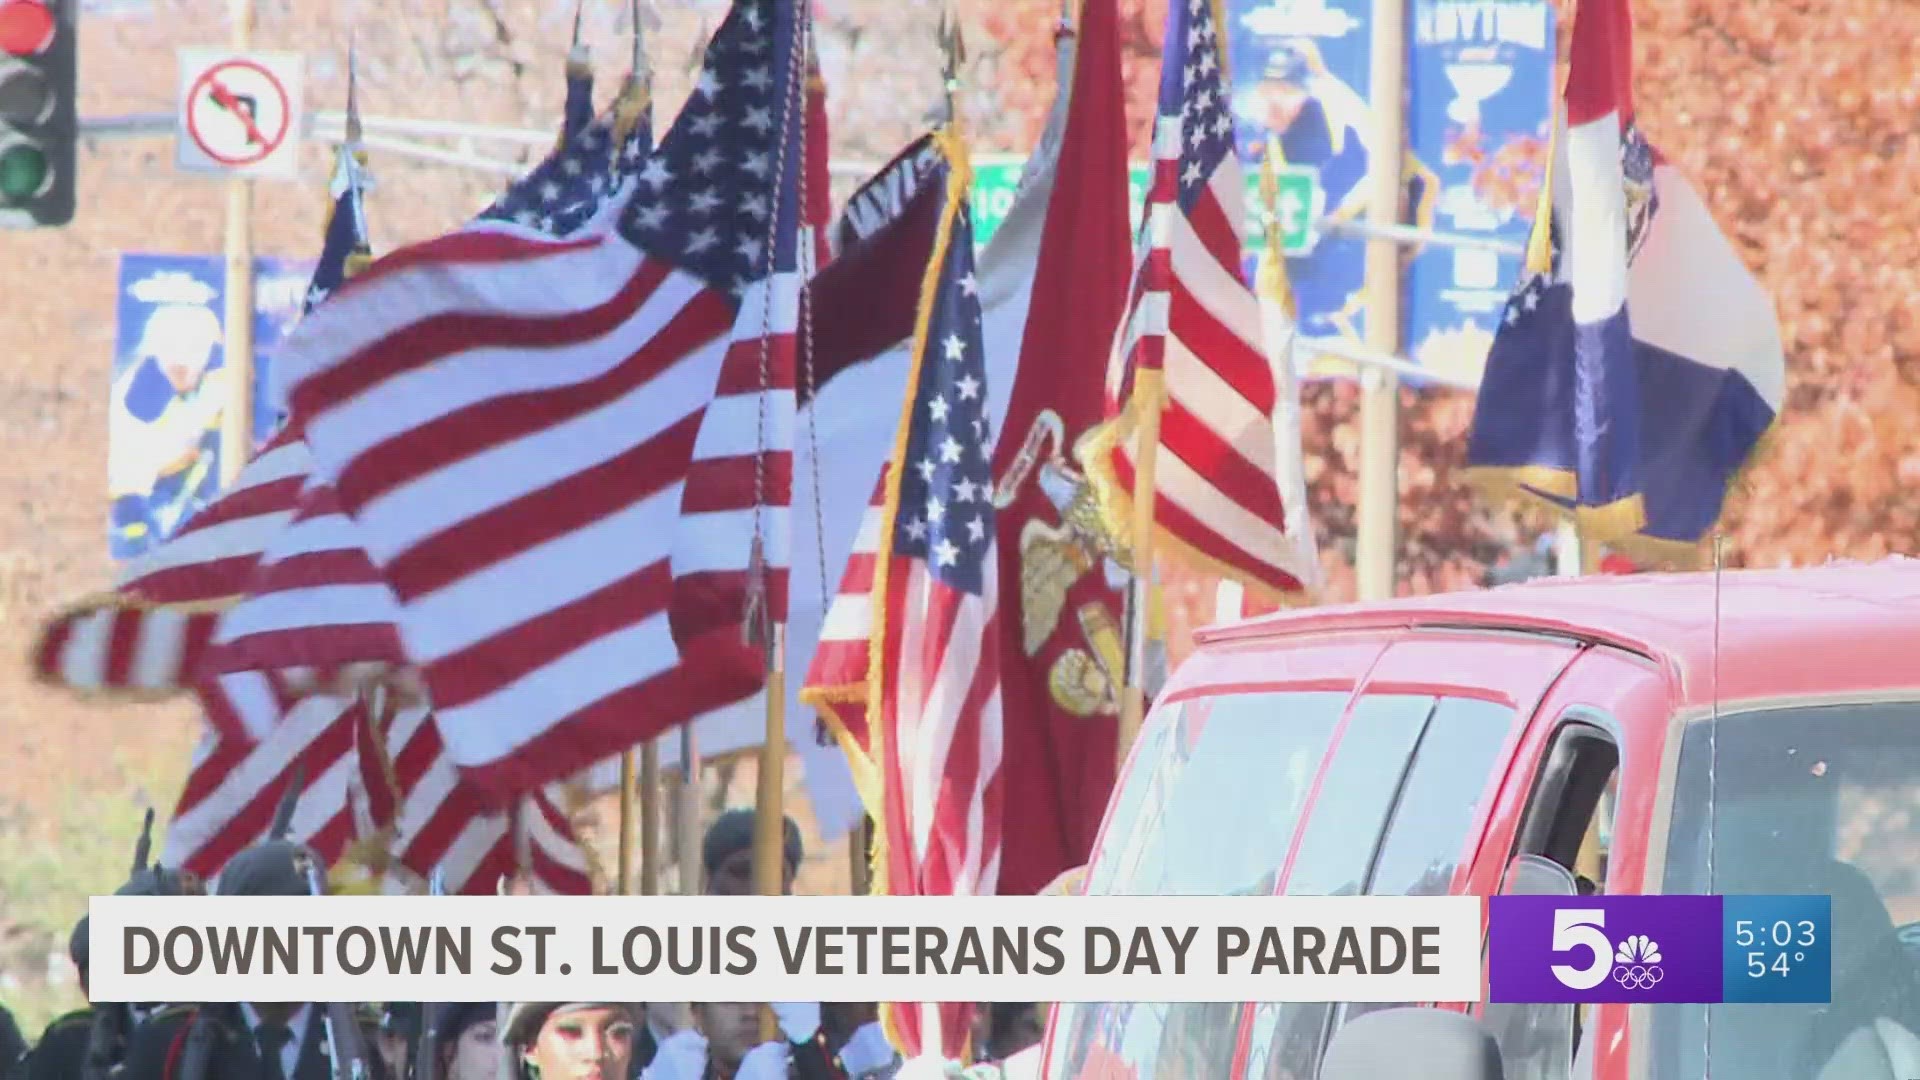 The St. Louis Veterans Day parade was held on Market Street. Veterans were also recognized in places like U City and Edwardsville.